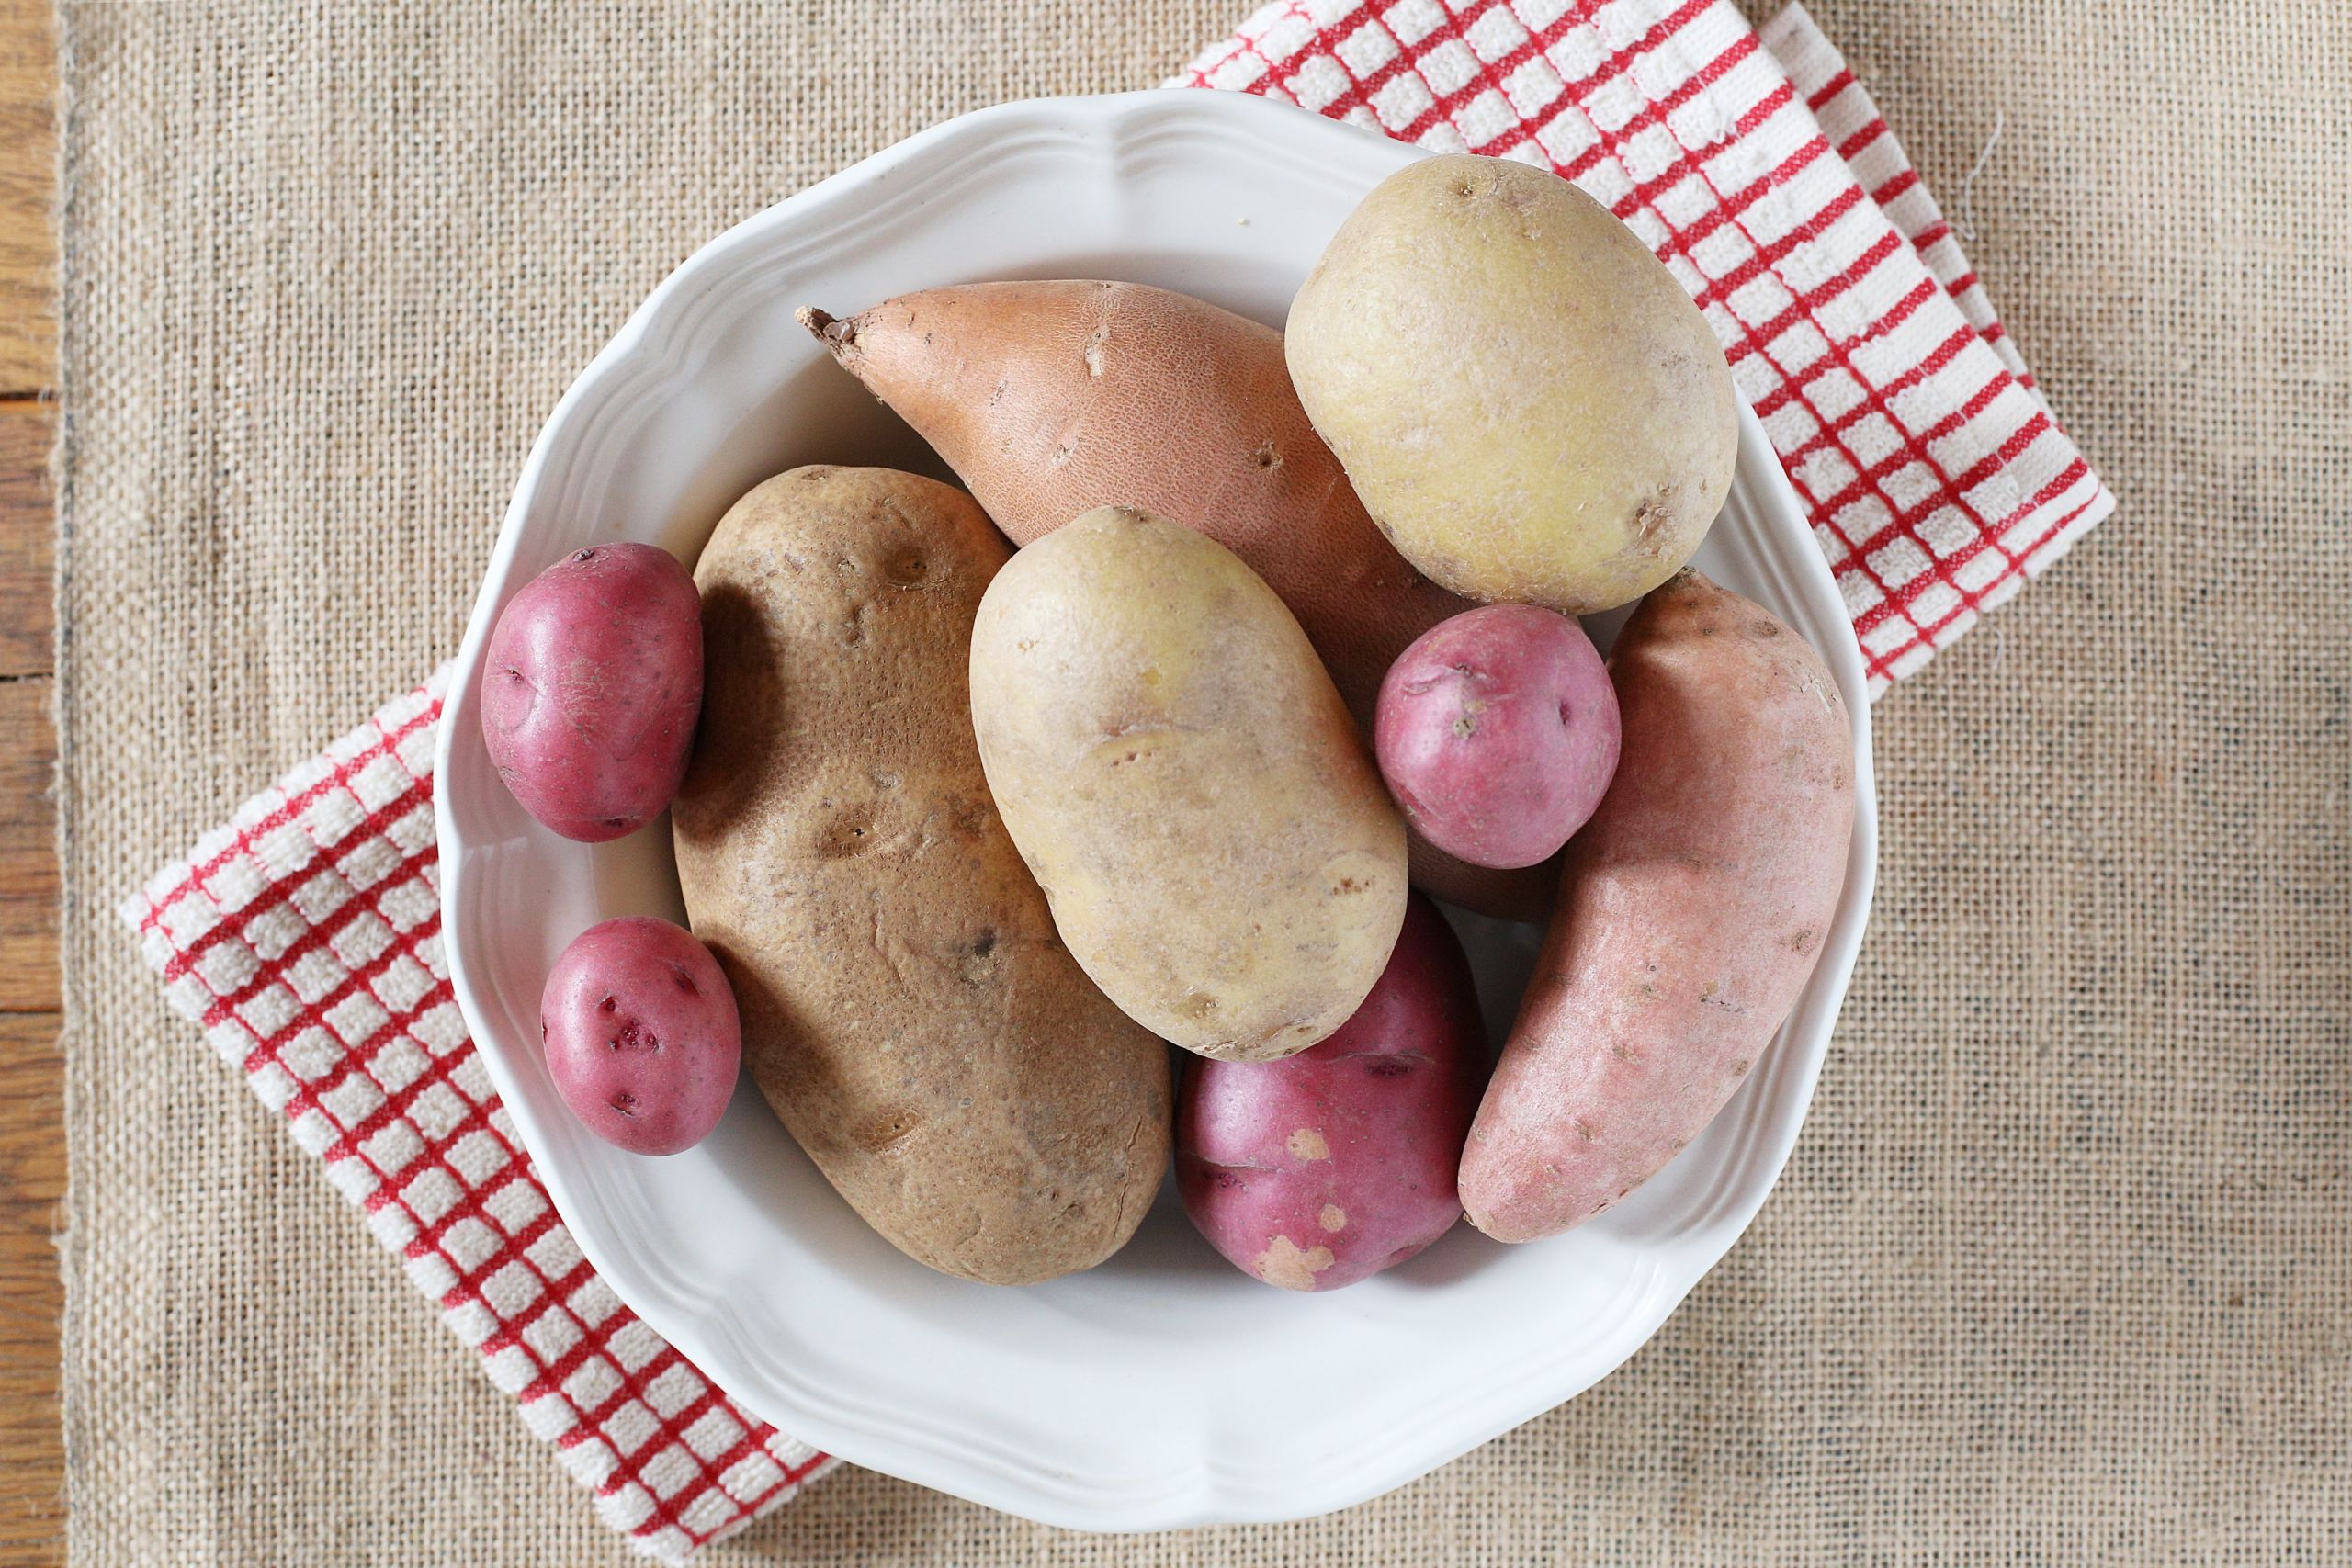 Potato Lower Classifications
 List of Different Types of Potatoes with